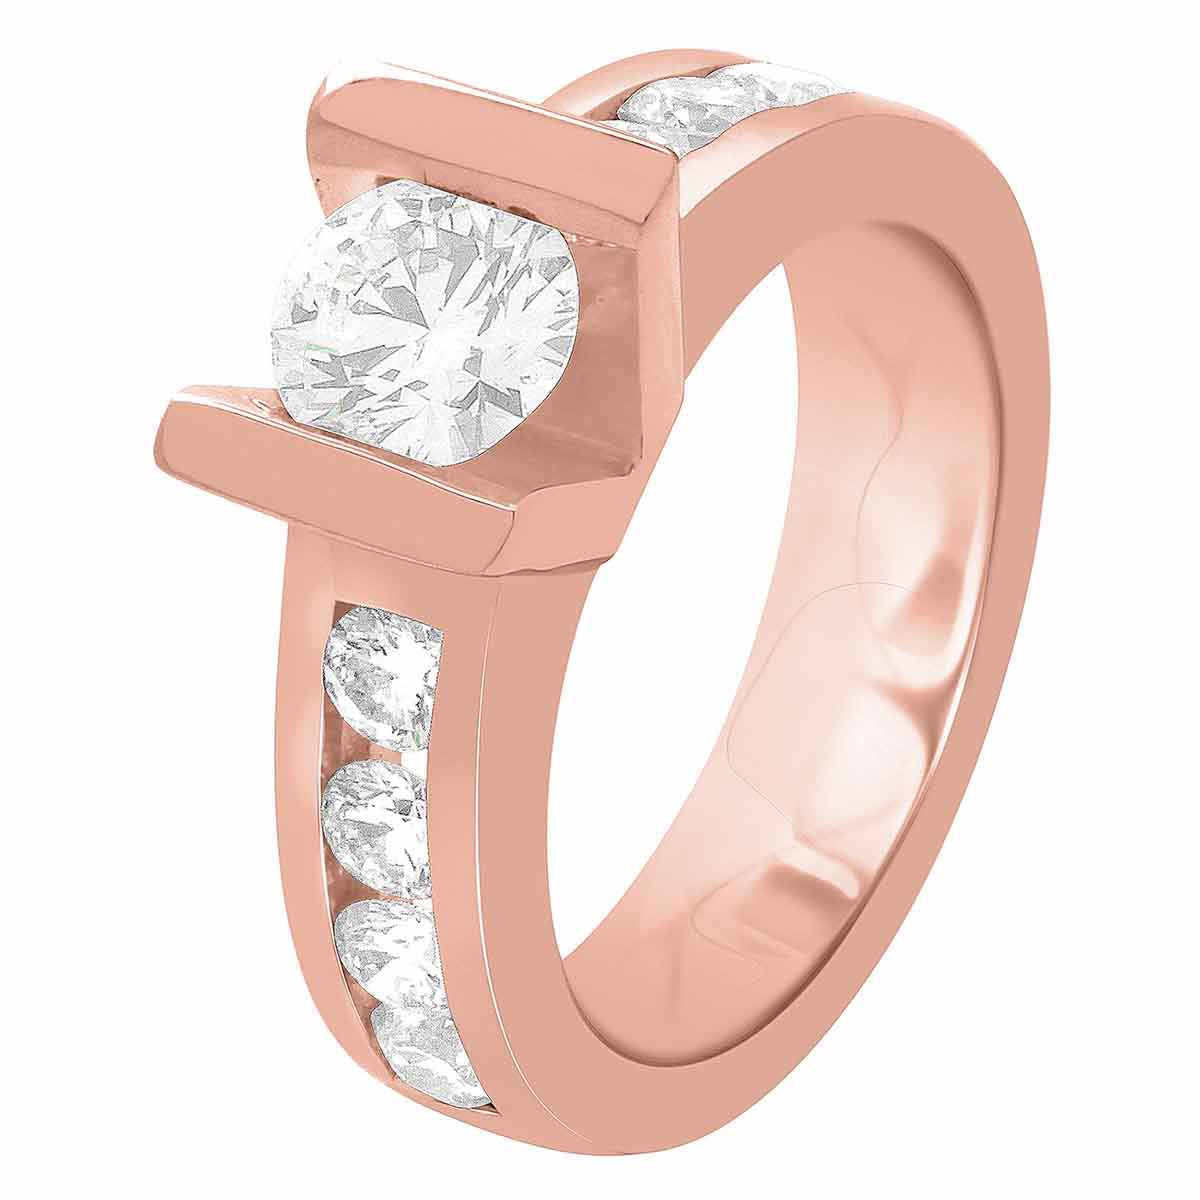 Custom Made Engagement Ring made from rose gold angled diagonally